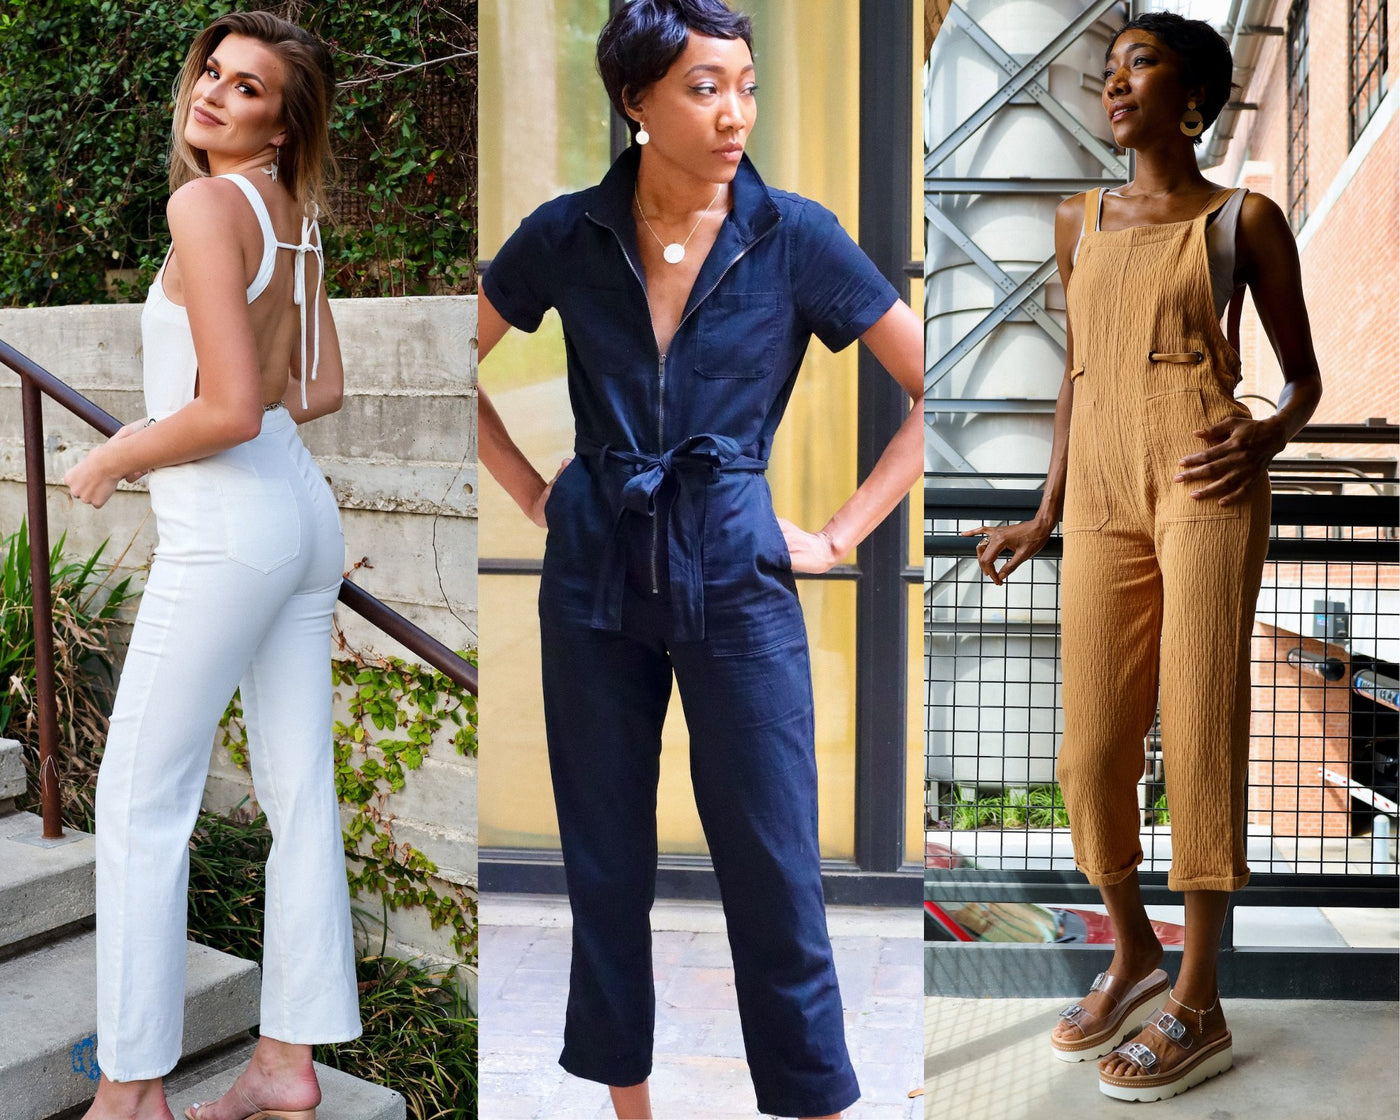 Rompers/Jumpsuits